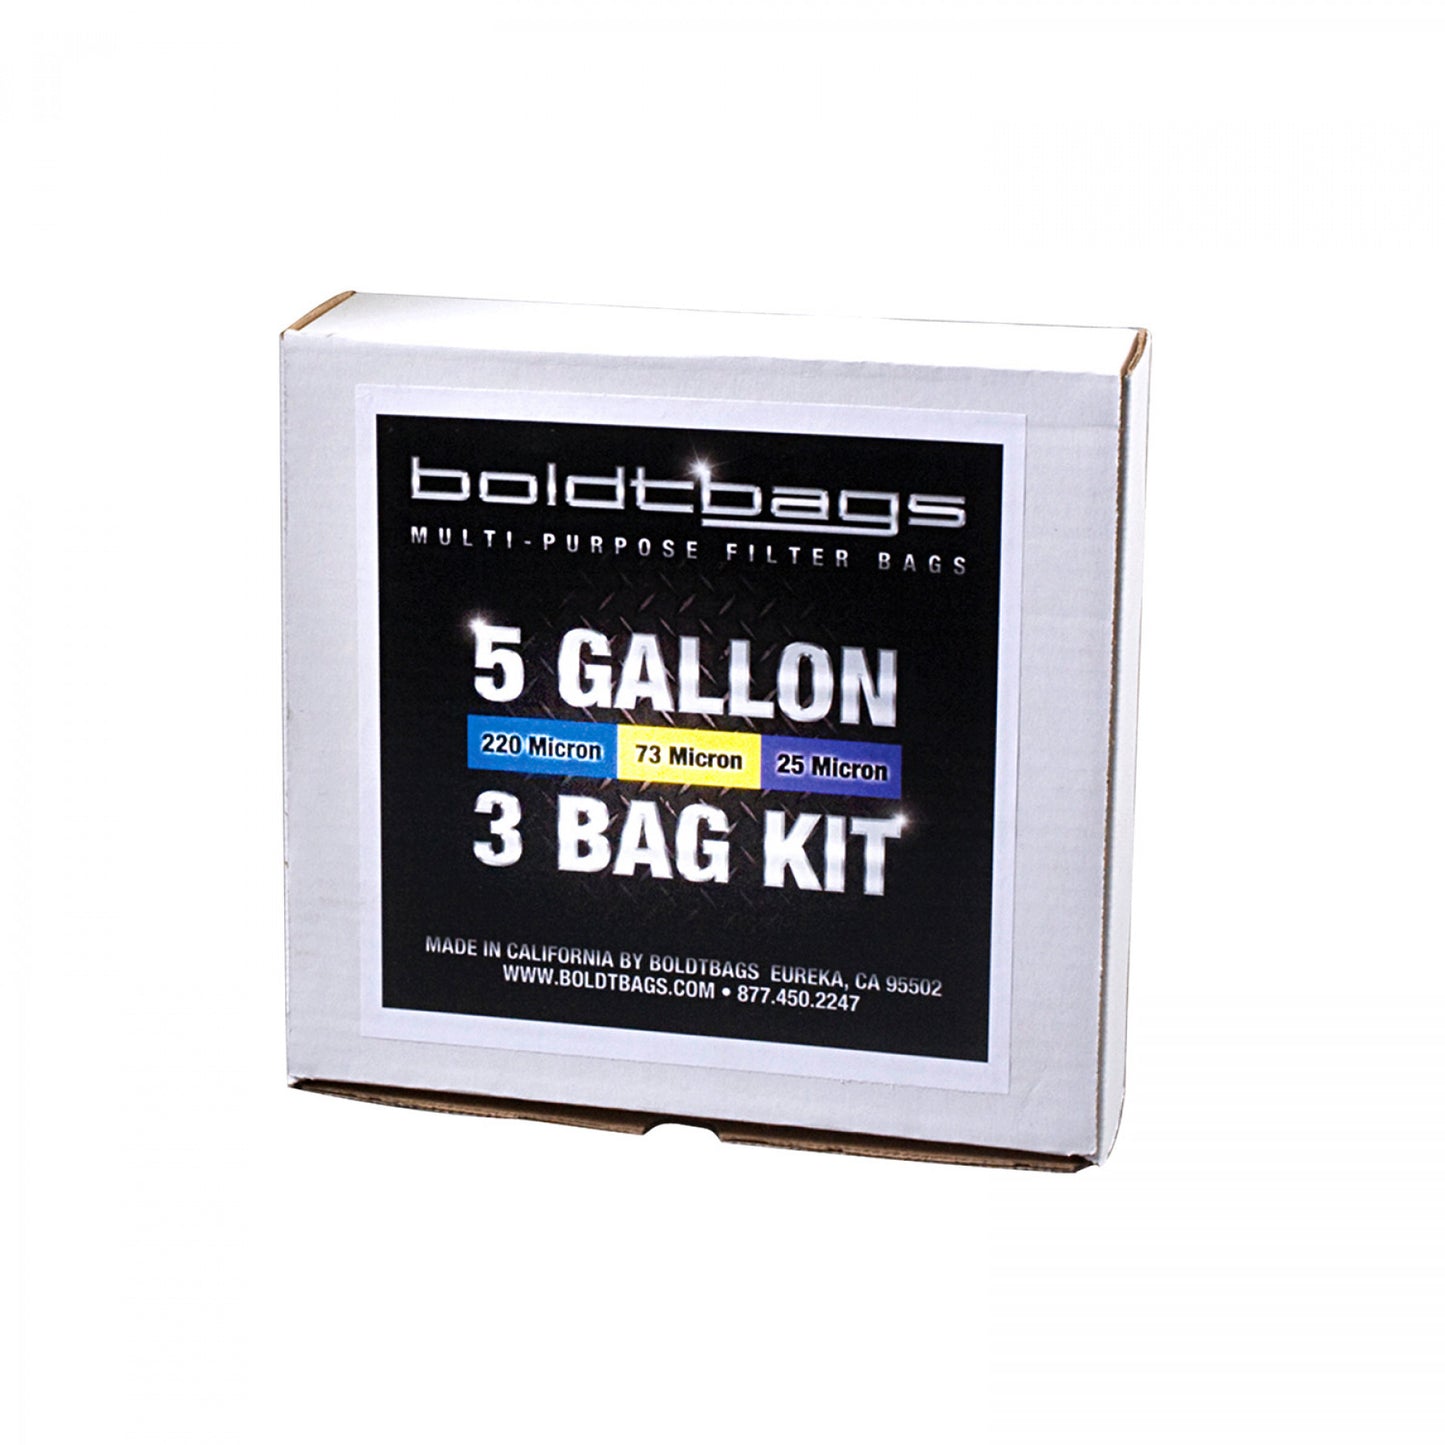 Packaging from Boldtbags contains a 5 gallon 3 bag bubble hash making kit